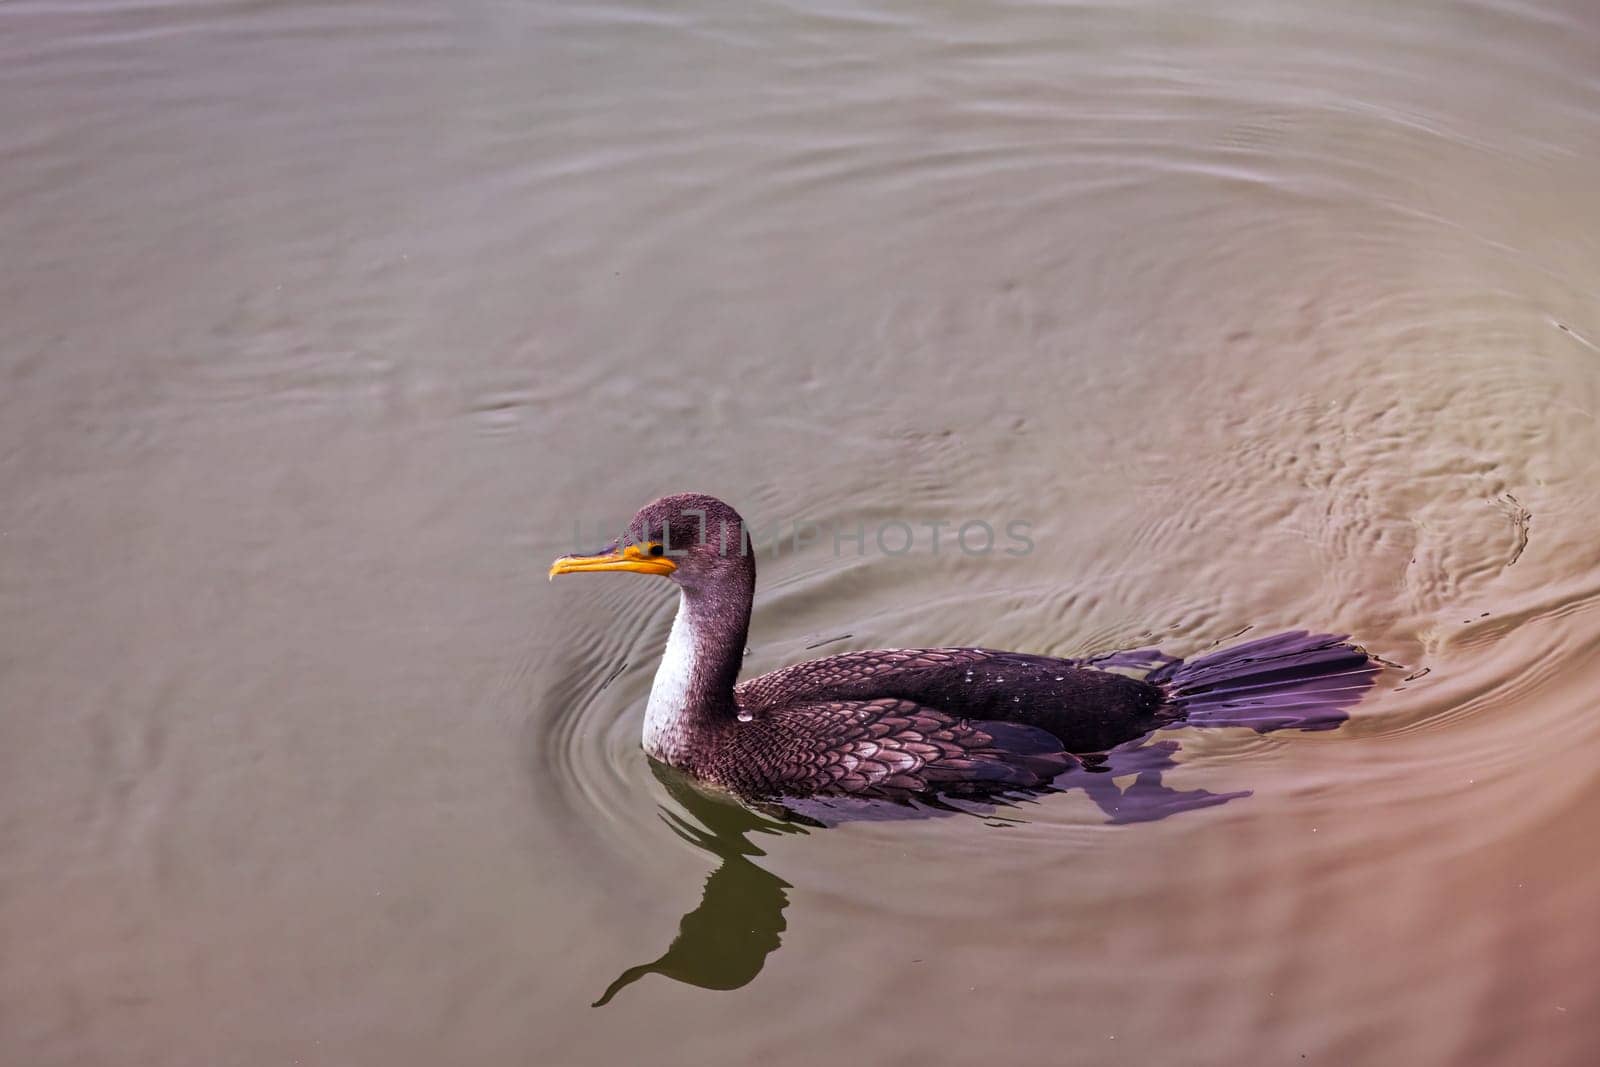 Capture the tranquility and natural beauty of the outdoors with this stunning photograph of a Phalacrocorax, also known as a cormorant, effortlessly gliding through calm lake waters. The image exudes a sense of peacefulness and balance, ideal for creating a soothing atmosphere in any setting. Perfect for adding a touch of nature to your home, office, or digital project. Excellent for use in publications related to wildlife, conservation, or travel. High-resolution and available for immediate download.